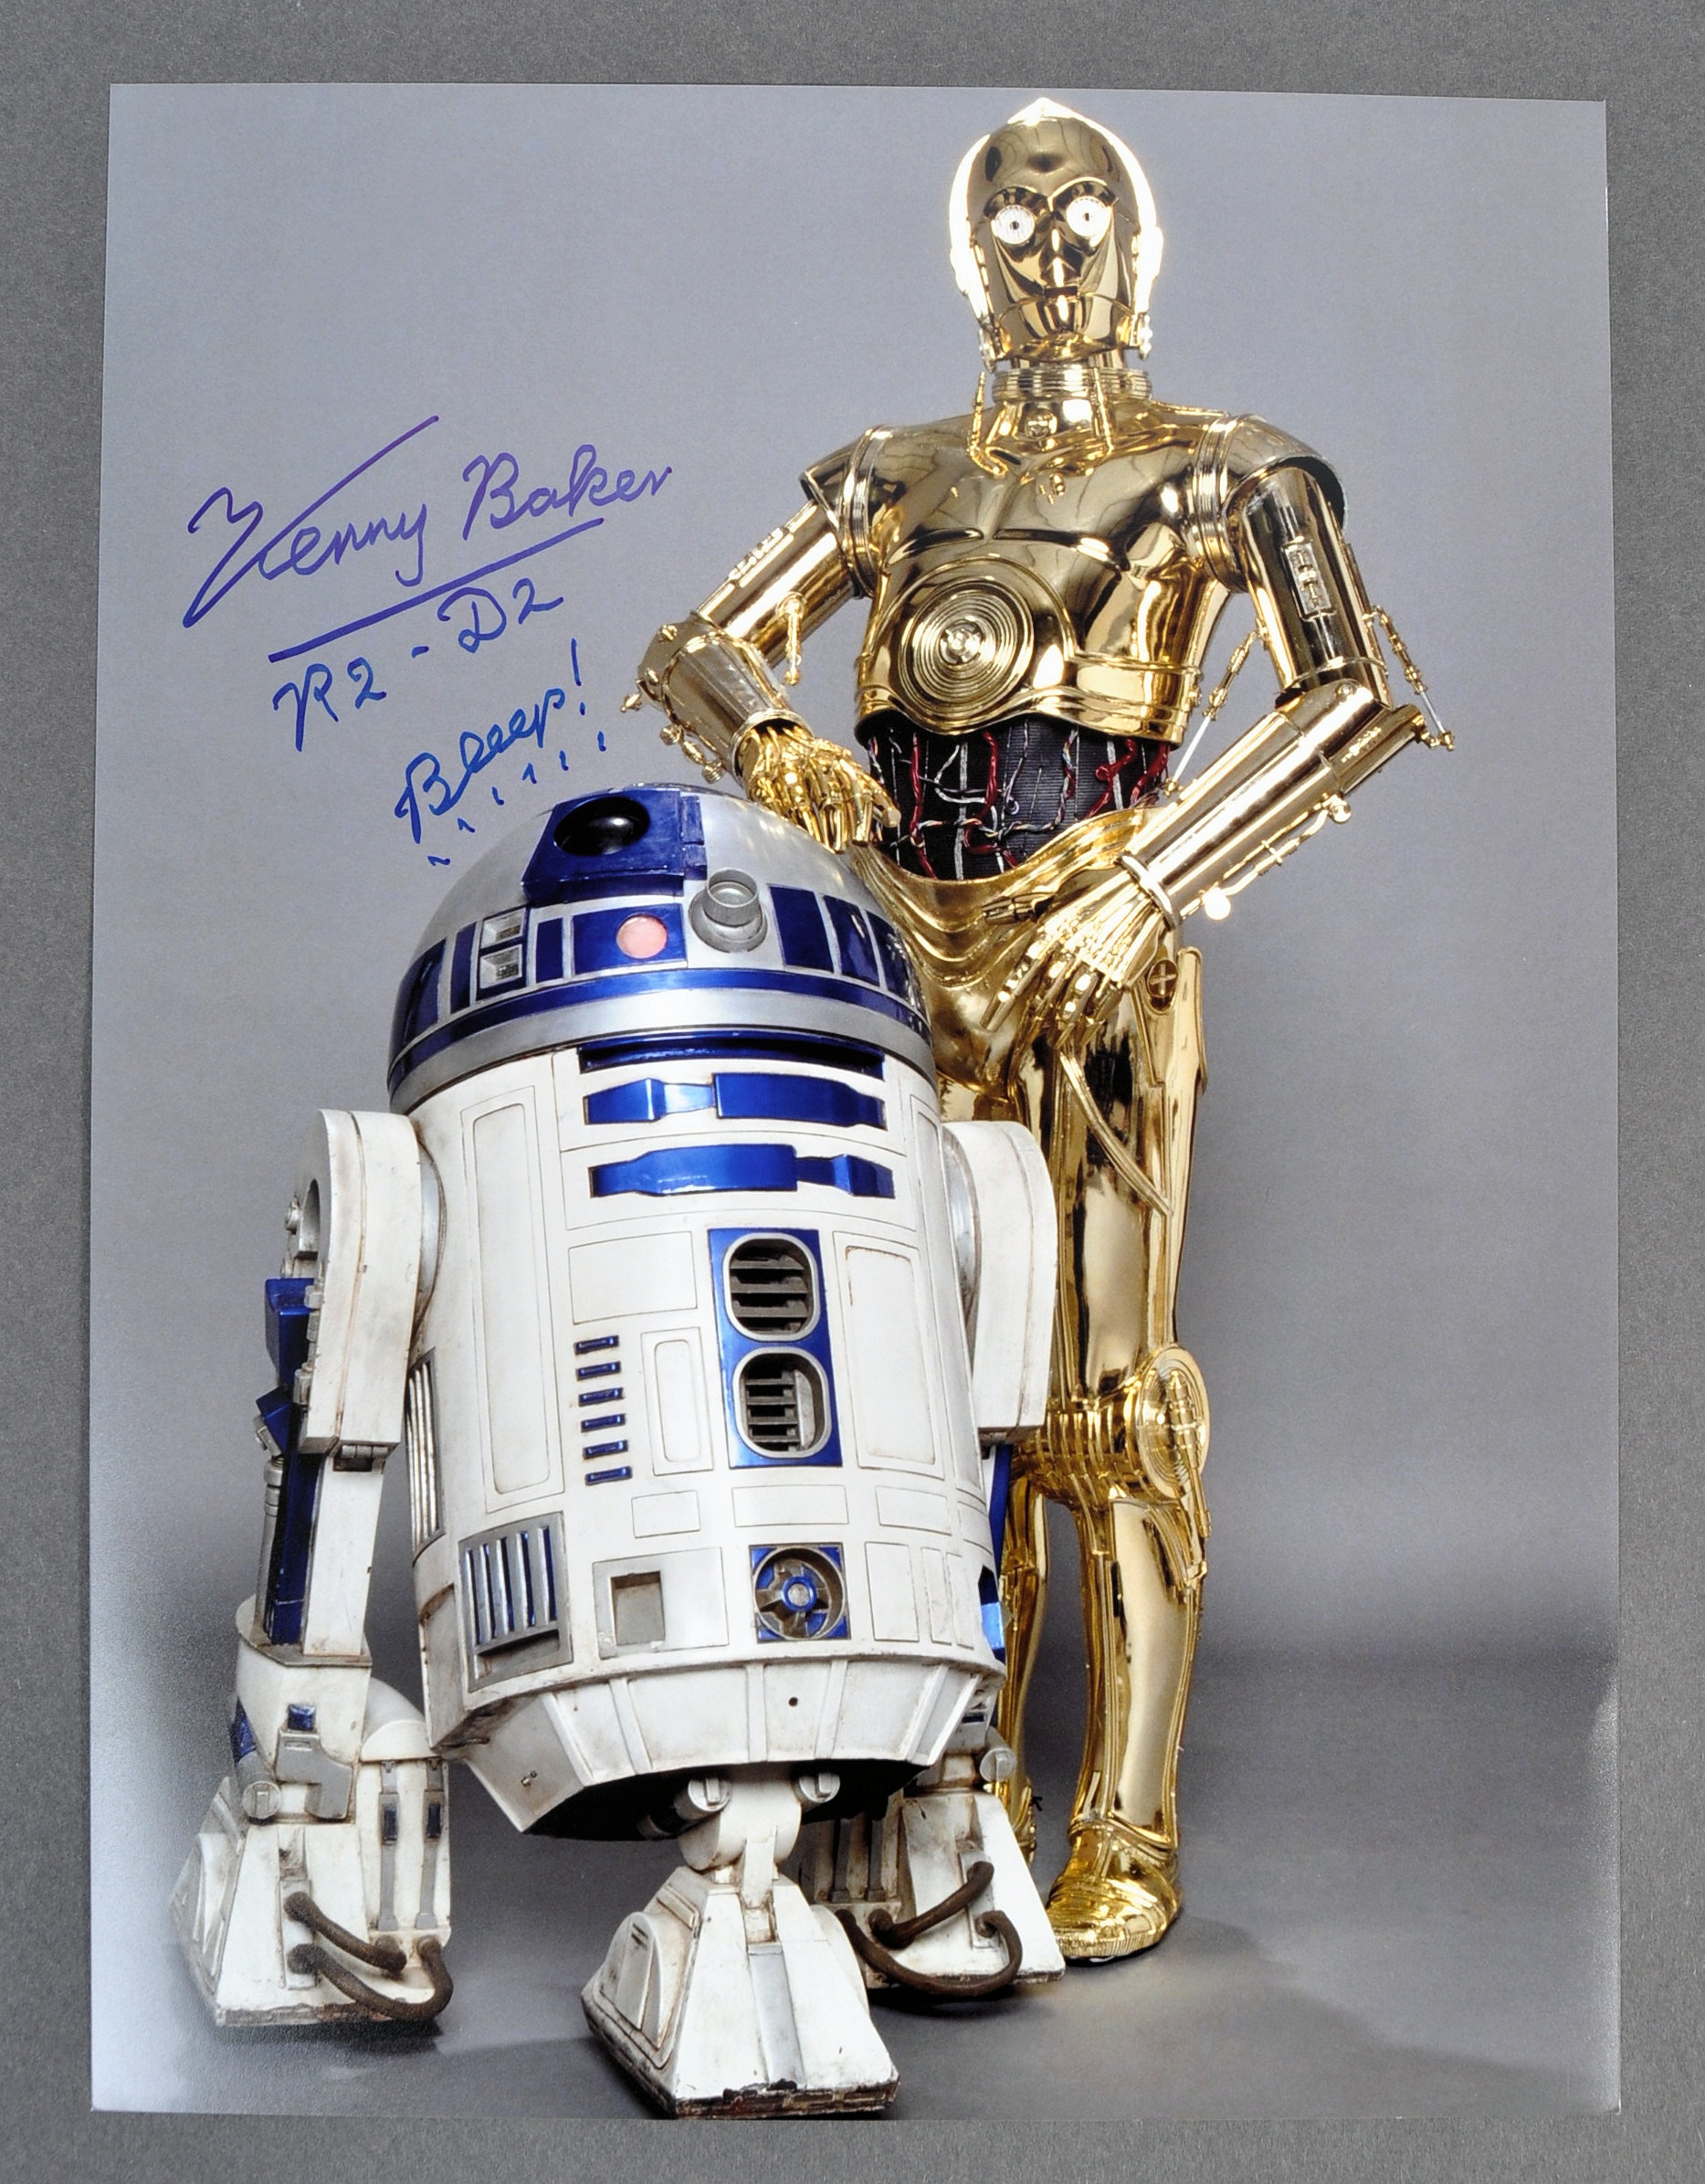 KENNY BAKER STAR WARS R2-D2 SIGNED AUTOGRAPH PHOTO PRINT IN MOUNT